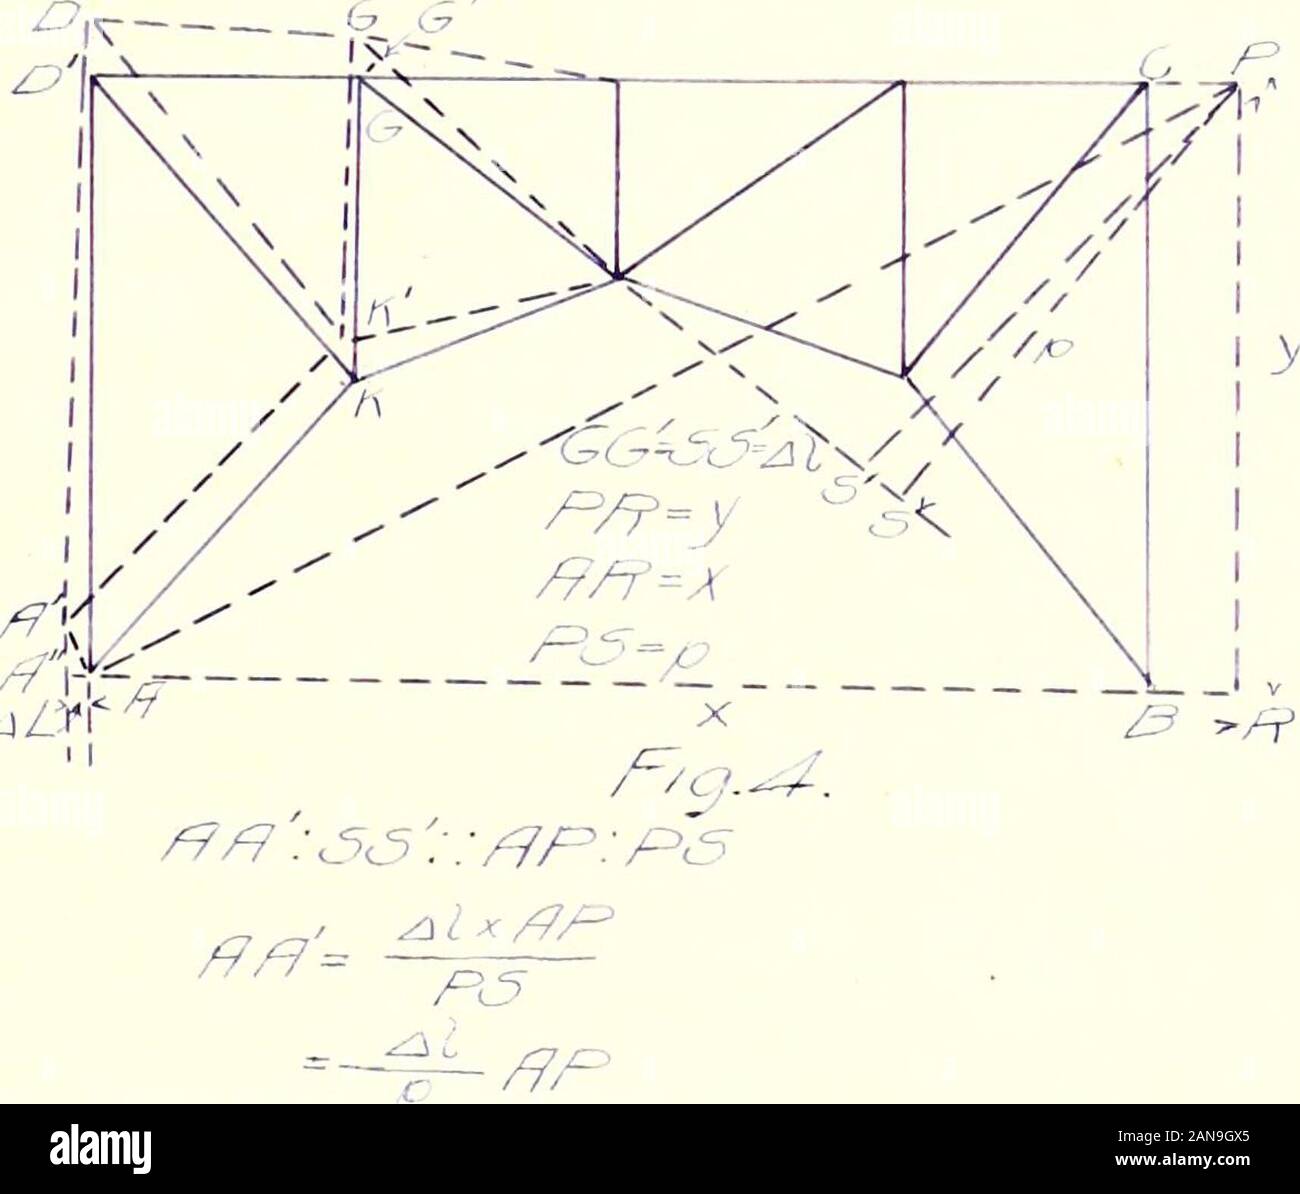 Design of 2-hinged spandrel braced steel arch double track railway bridge, 400 ftspan. . ?/7F /r? c5&gt;^7//c-^r 7r-/c7/7c^/c^ /7/^h zr7cy/7/^rf. Z -9- DIAGONAL BRACE:. //7 c5//77//c7A //vV?^7^/£lS/f/f/^r///c//^/=/^% ^^^Fr? yx/7/7 /?/ RIB MEMBER: z; f- — - // /;  /  N / / / rM t^ ^^^ ^^-^ / / V , /77/^/l,?  / ^ / 1 y C^/f-i  J ^ // 1 /^/P^A  /a J  G3=^  ^z^Z /7/, v/e get ^^y Any reaction at the abutments having horizontal andvertical components,// and /^, will produce a stress,/, inany piece which v/ill give, by the method of moments -11- By substituting this value of ^ in /fcv/^/jW Stock Photo